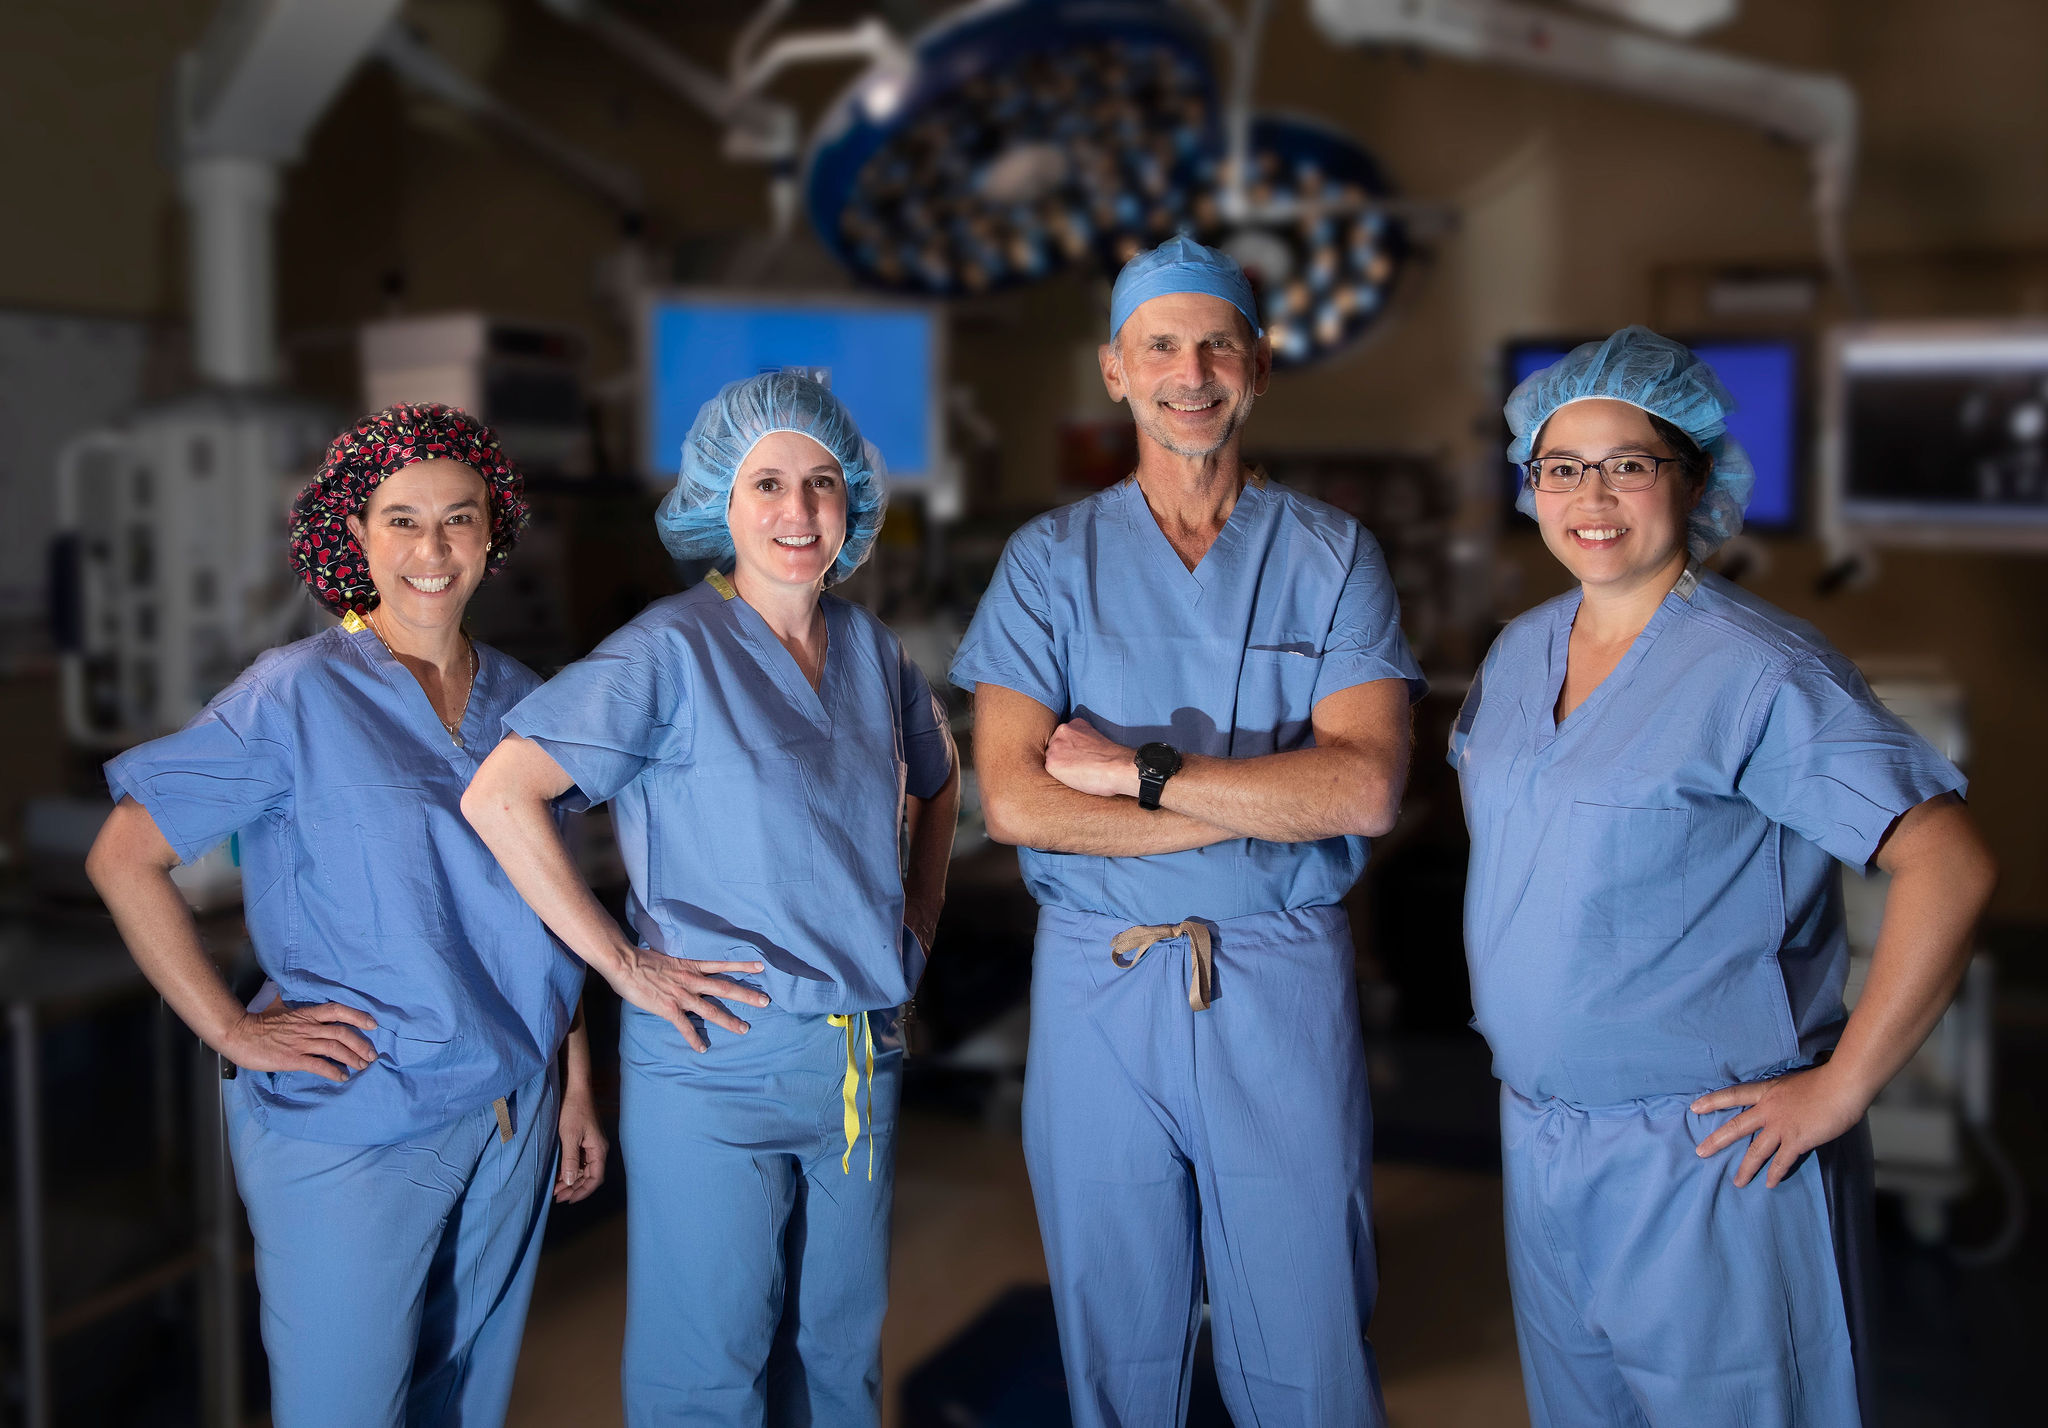 Dr. Rothenberg and three fellow surgeons wear scrubs in the OR